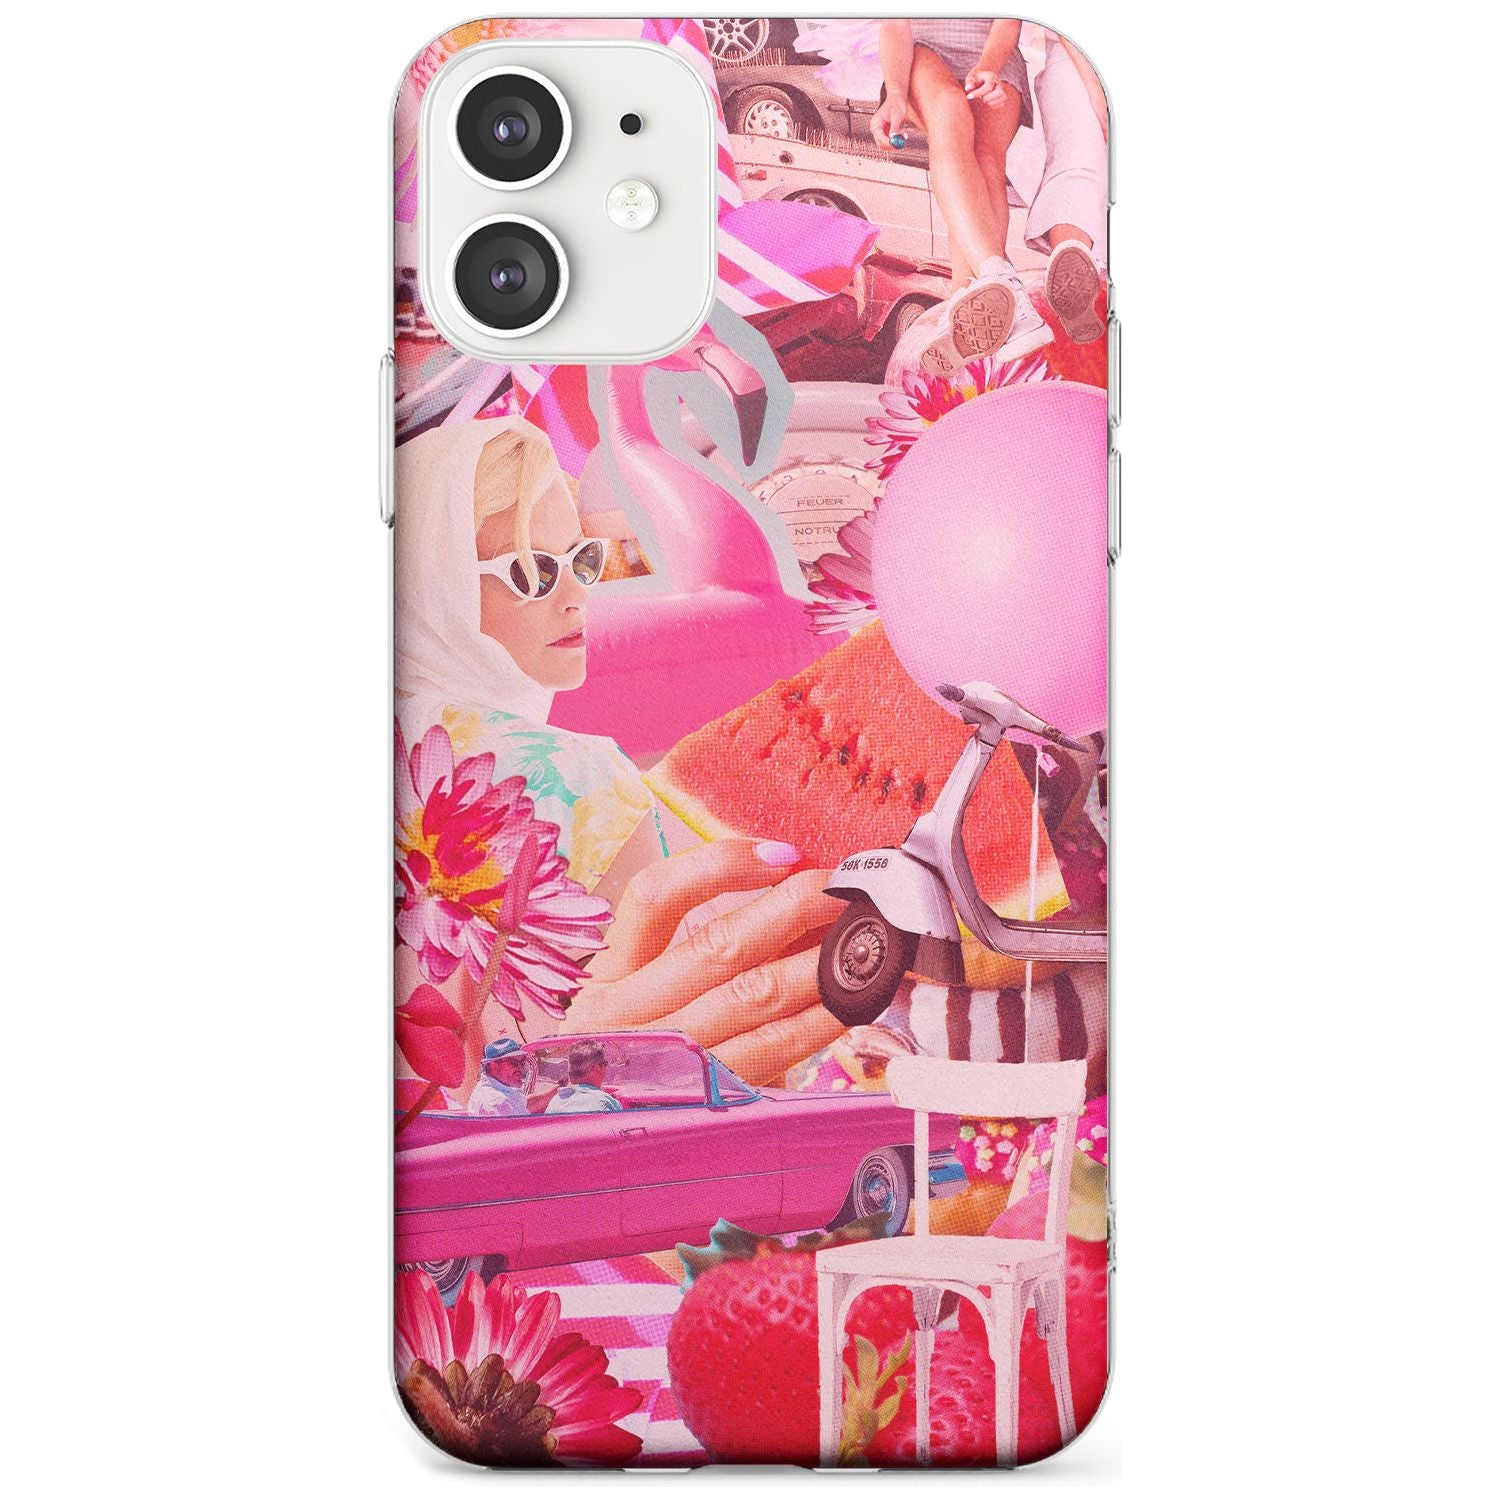 Vintage Collage: Pink Glamour Slim TPU Phone Case for iPhone 11